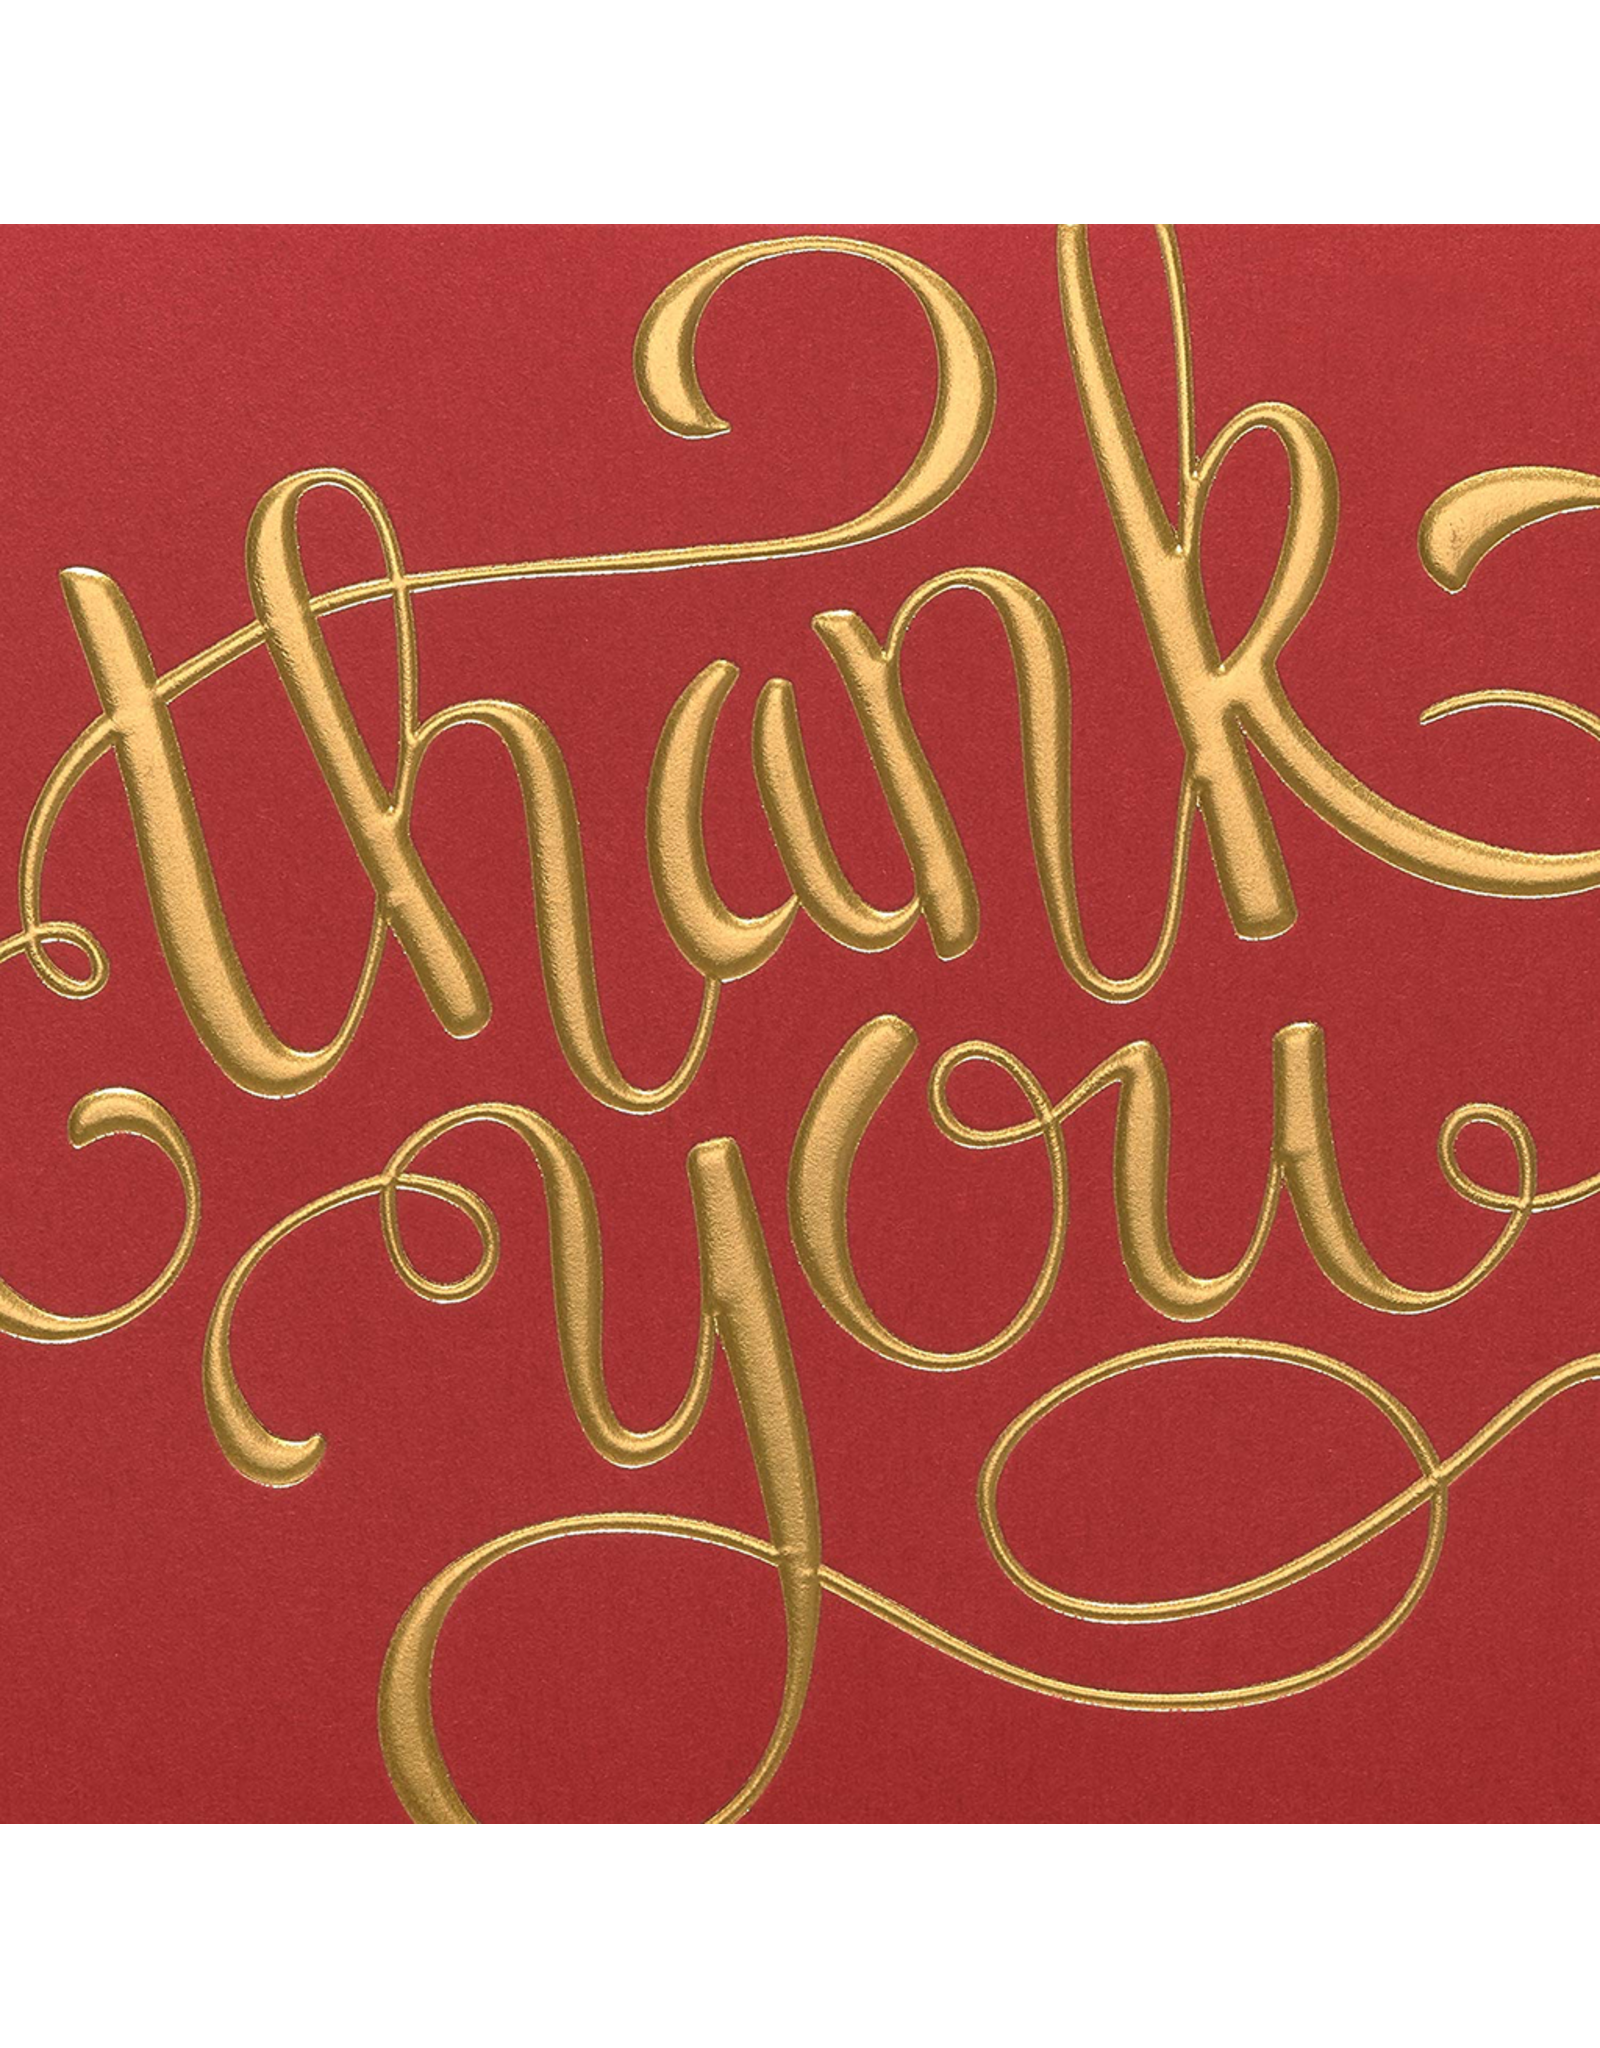 PAPYRUS® Boxed Cards Thank You Gold Foil on Red 12pk